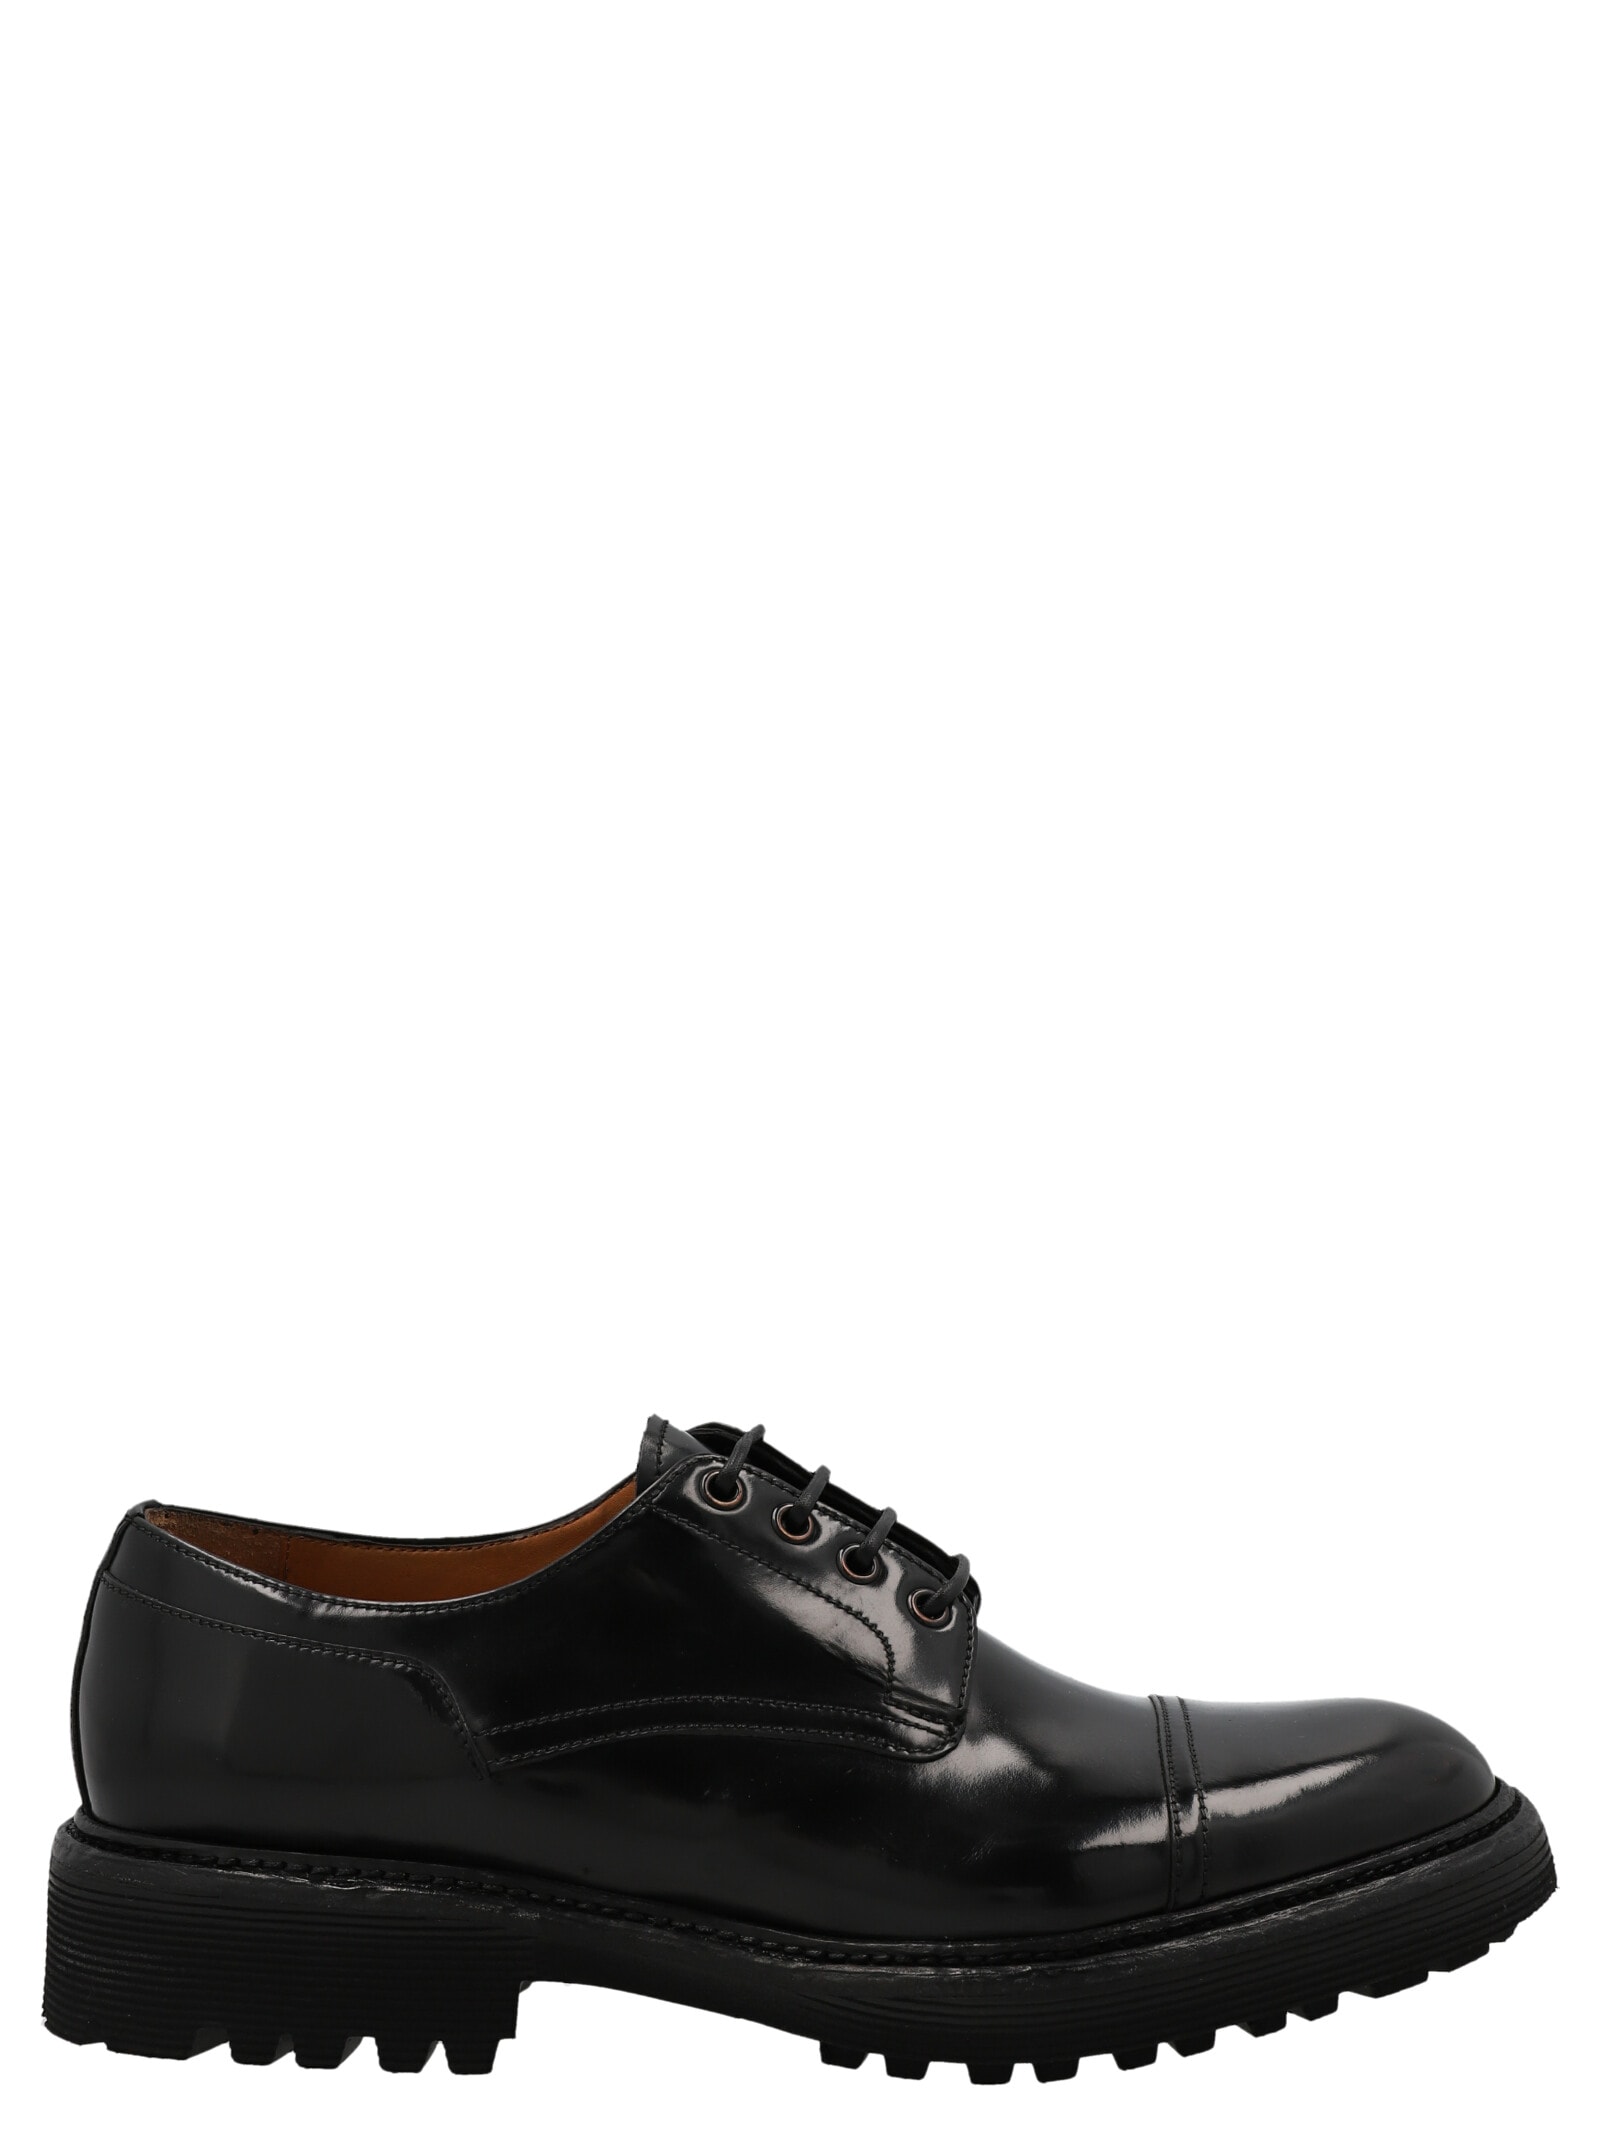 Silvano Sassetti brushed calf leather derby shoes